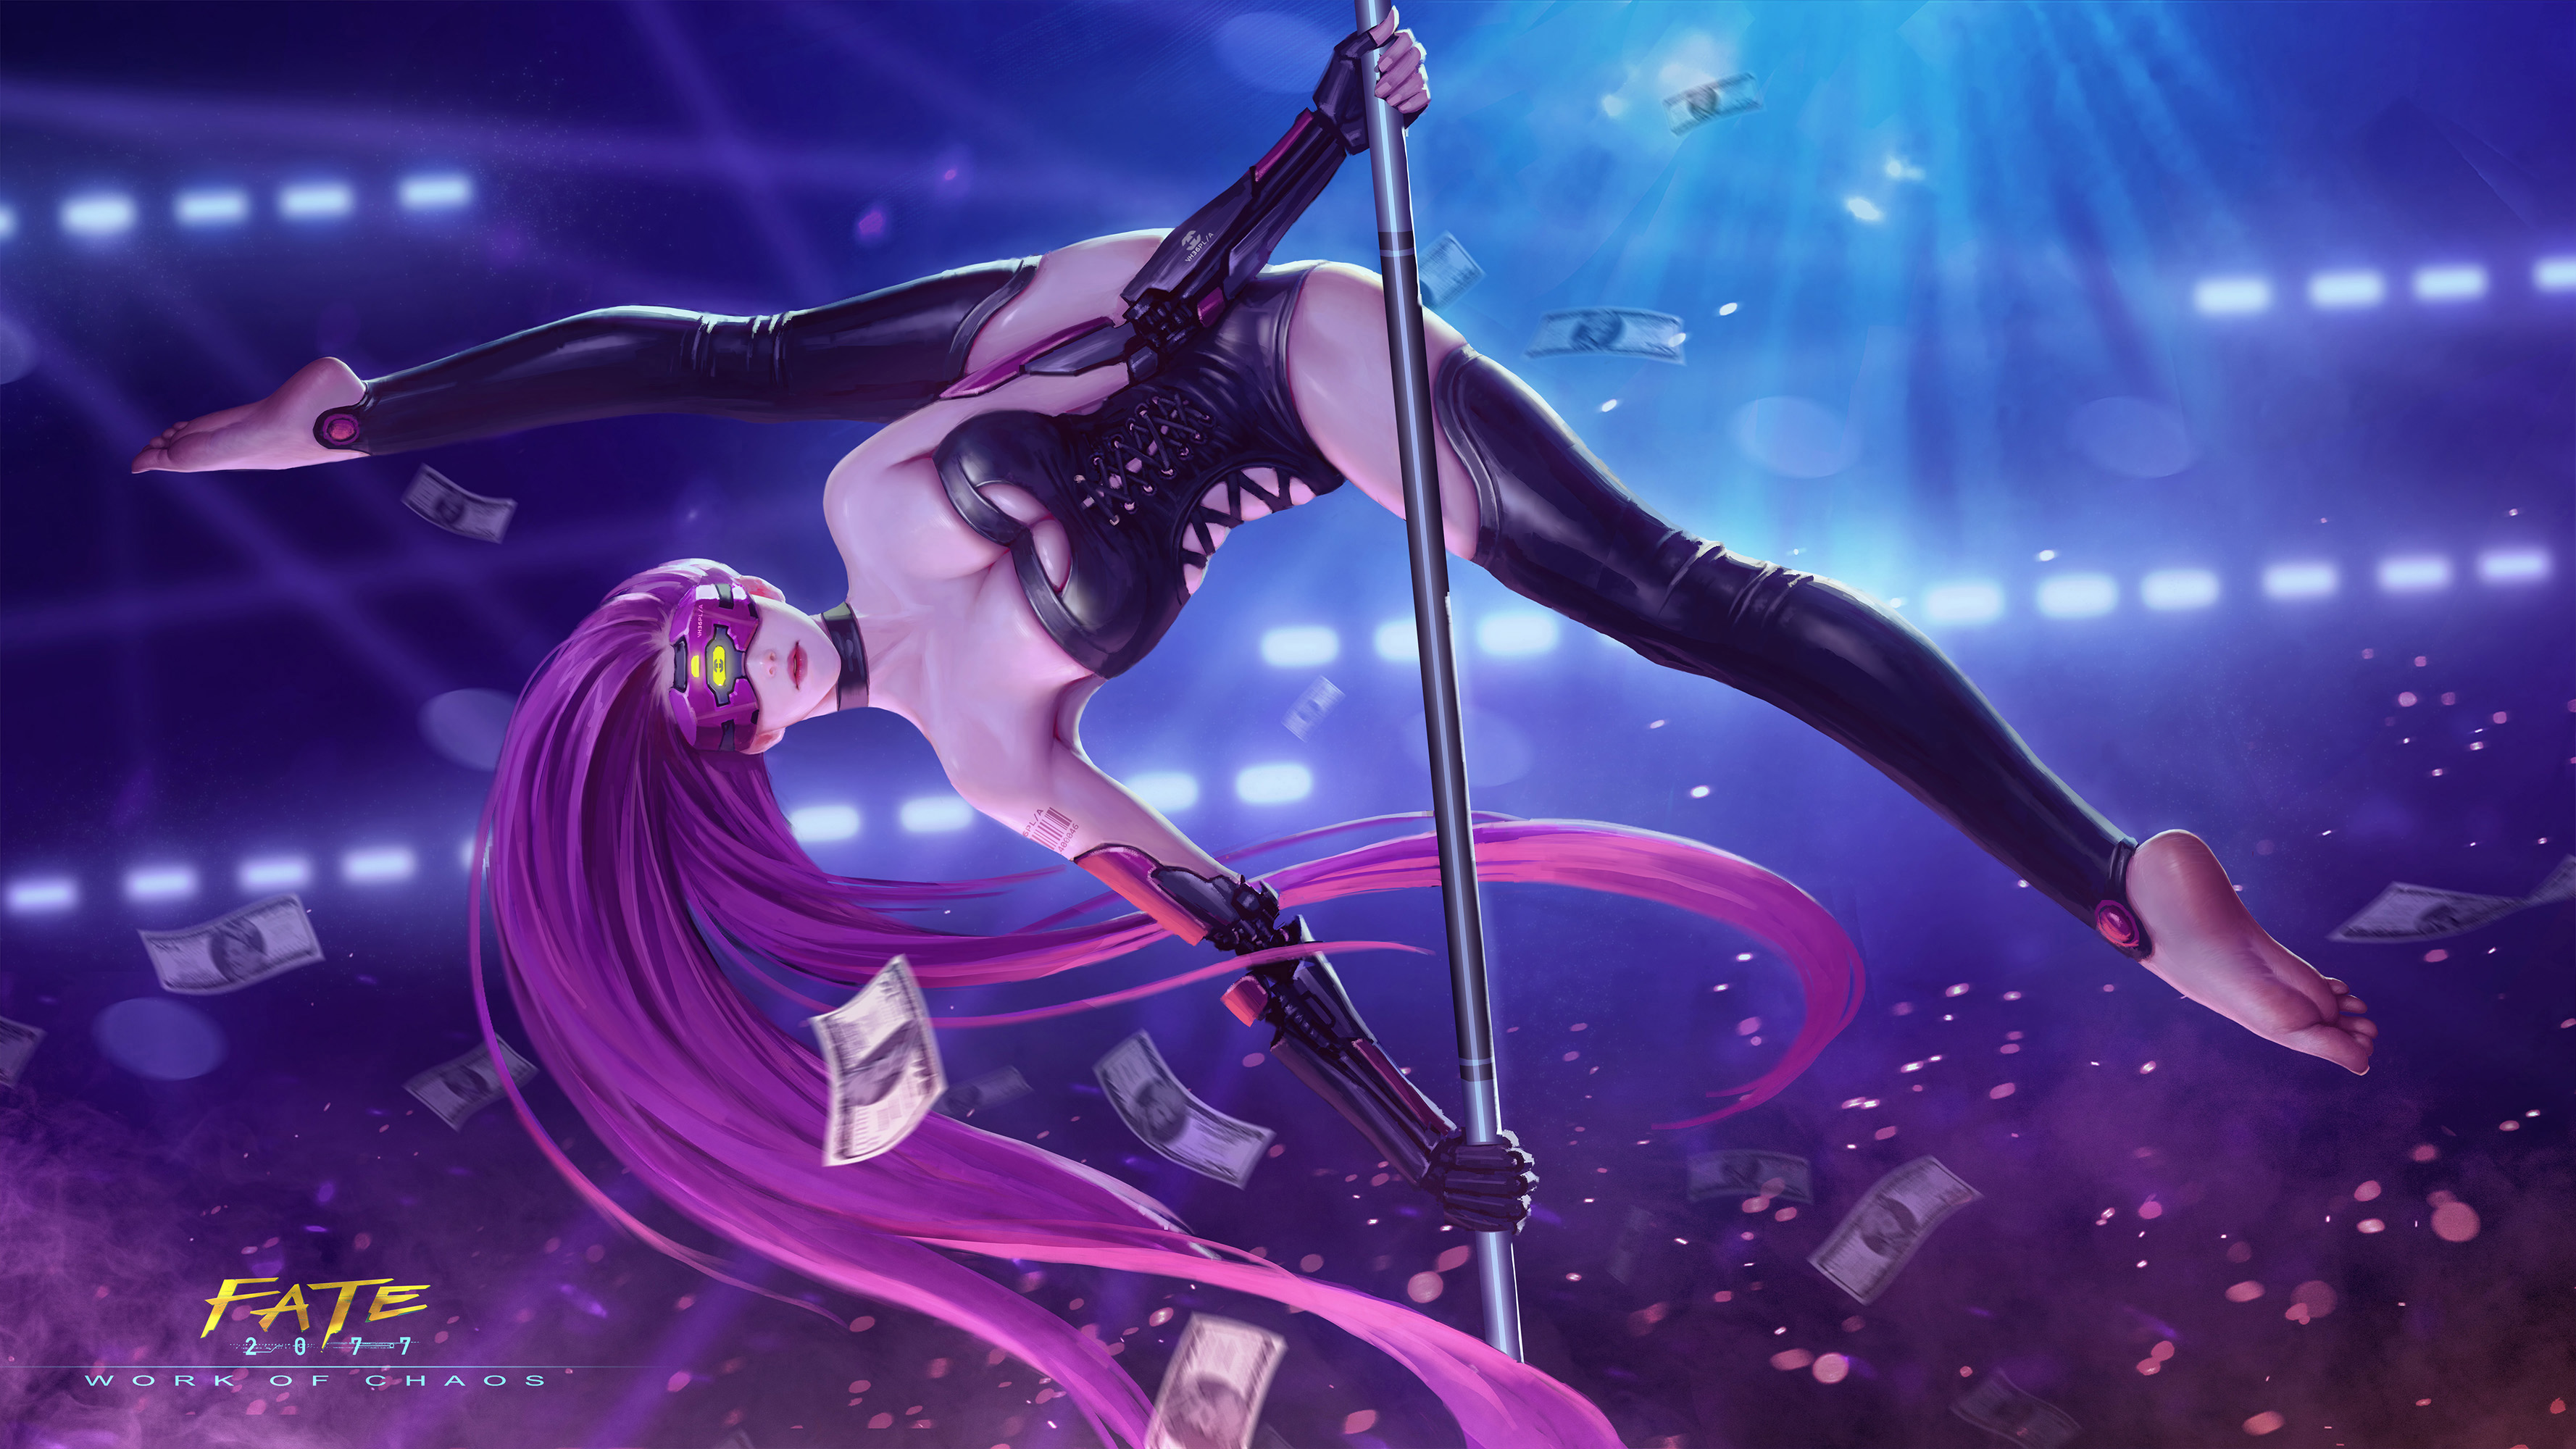 Anime 3555x2000 Fate series Fate/Stay Night fate/stay night: heaven's feel anime girls ass glutes big boobs long hair purple hair the gap blindfold barefoot armpits cyborg black thigh highs thighs cleavage ecchi 2D spread legs dancing poles black corset crossover parody money Rider (Fate/Stay Night) red lipstick curvy fan art feet ArtStation